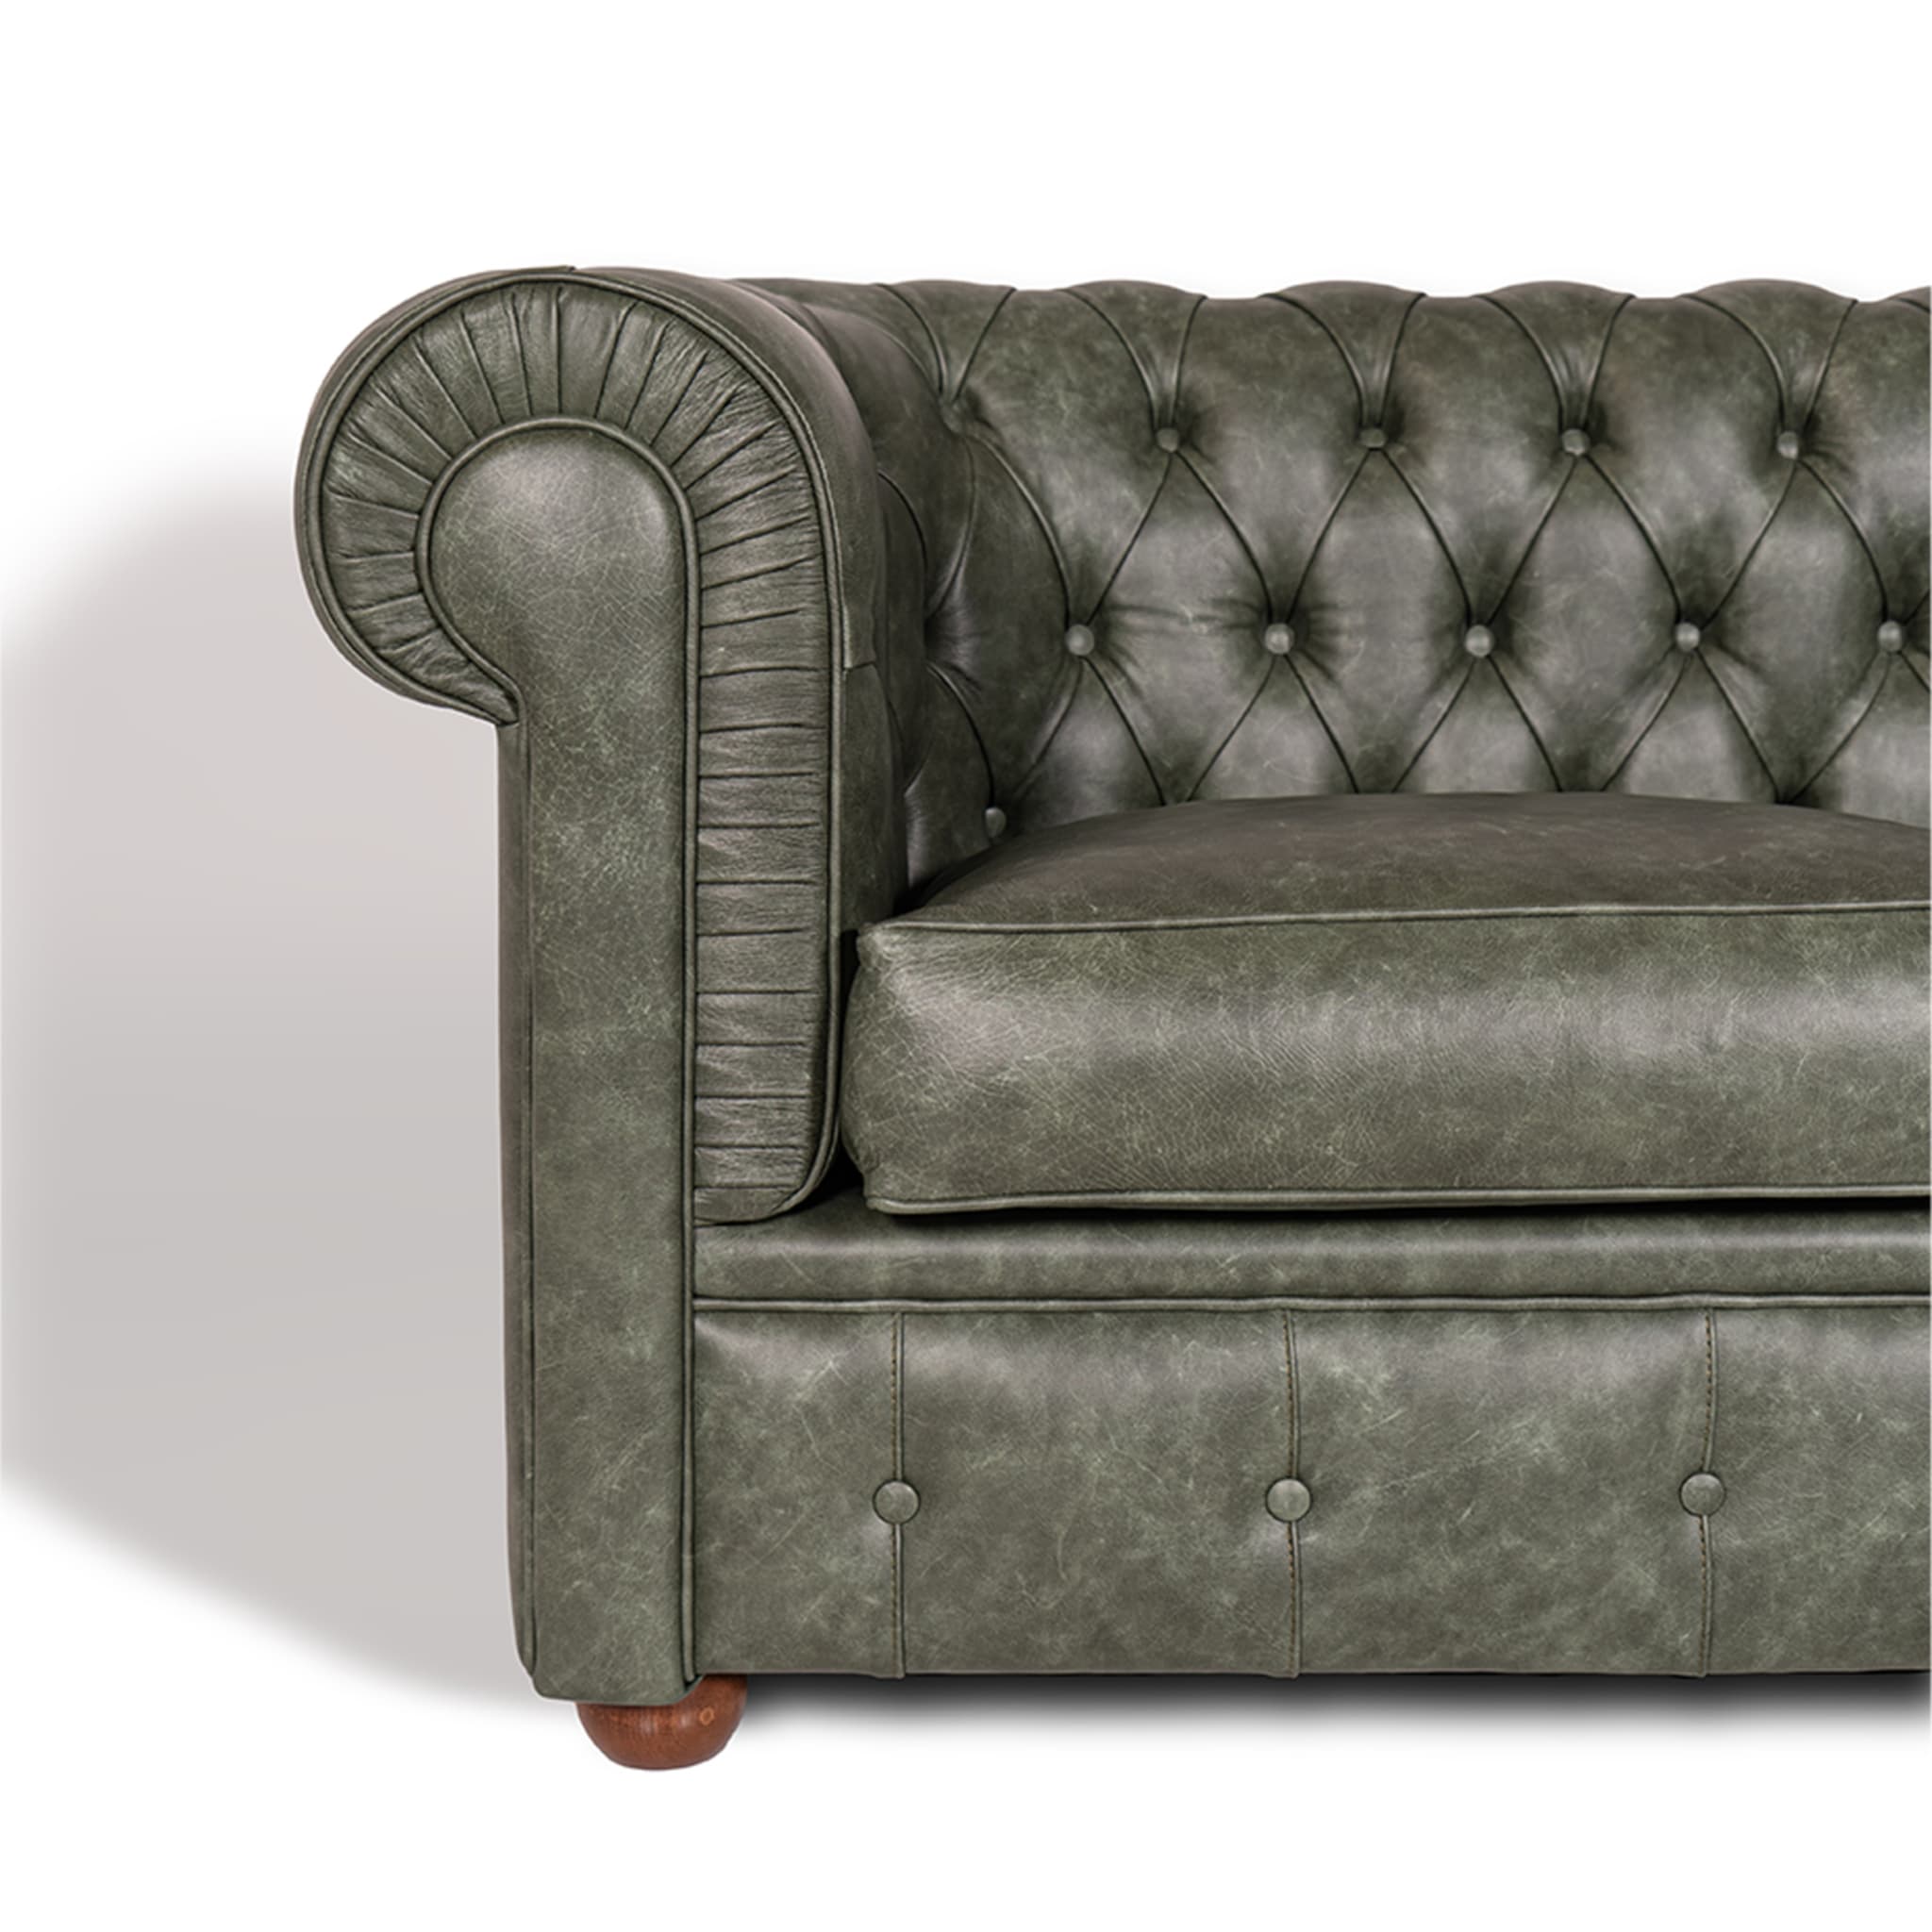 Chesterfield Green Leather Sofa - Alternative view 2